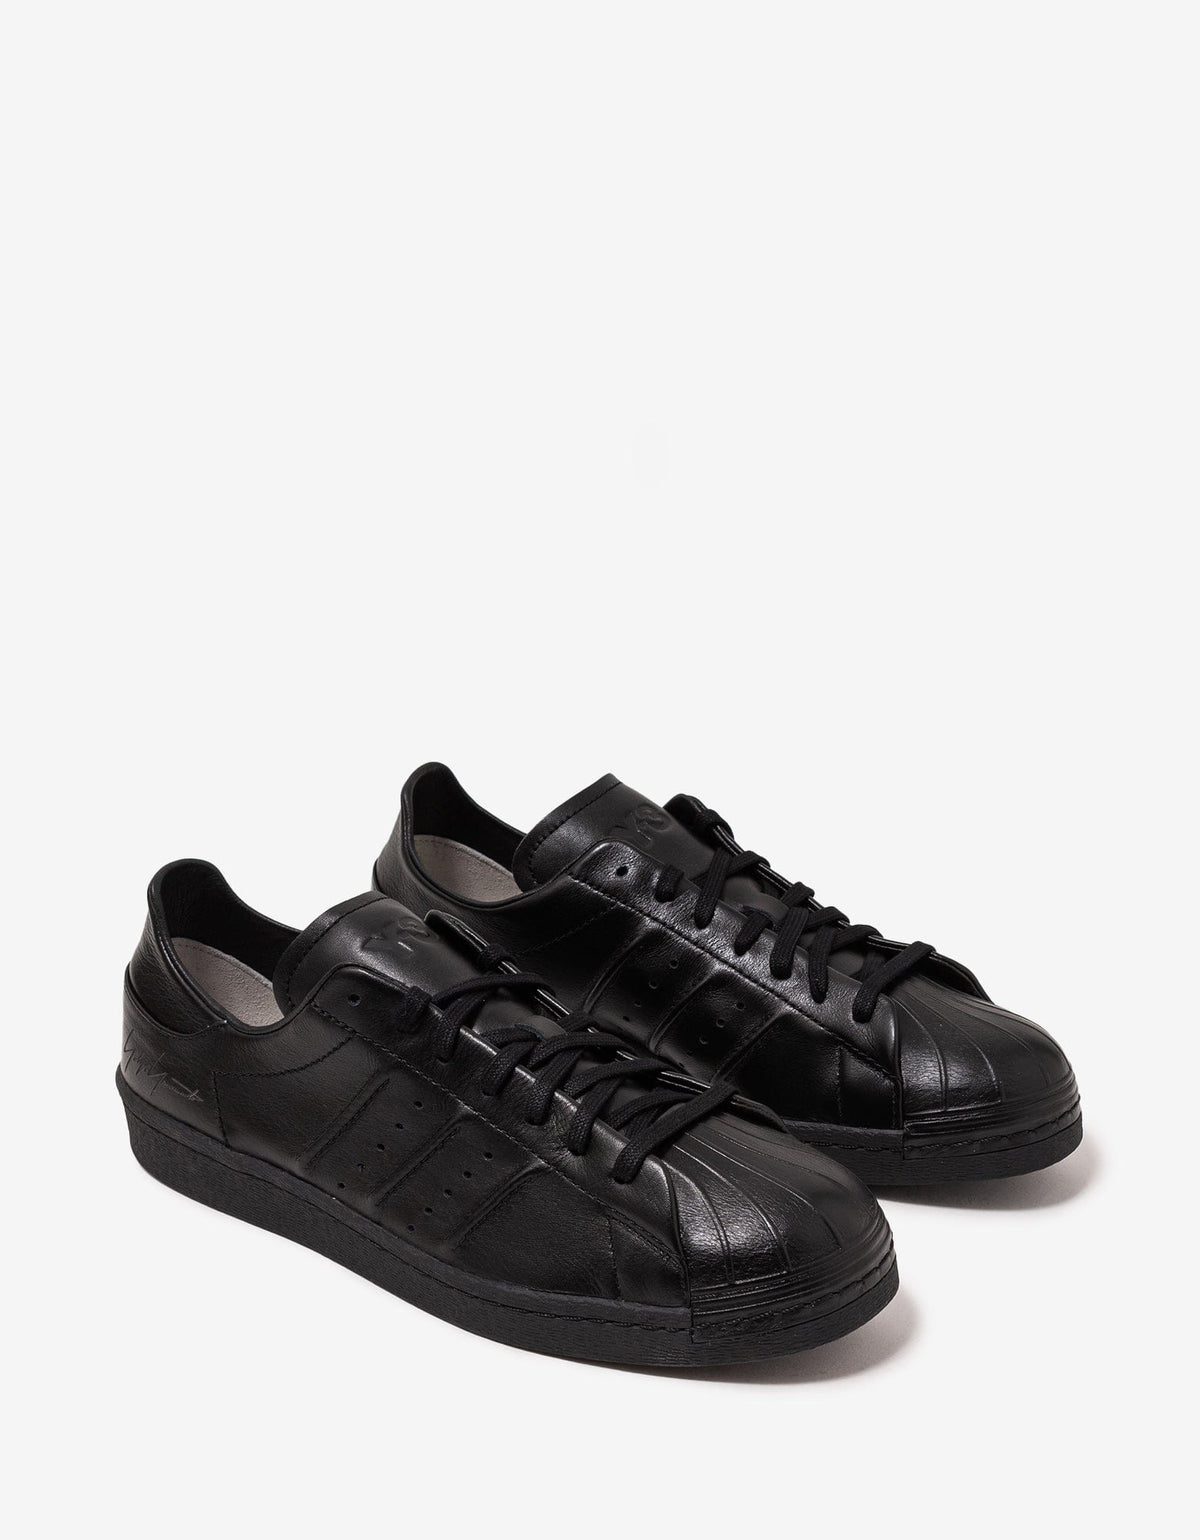 Y-3 Black Leather Superstar Trainers